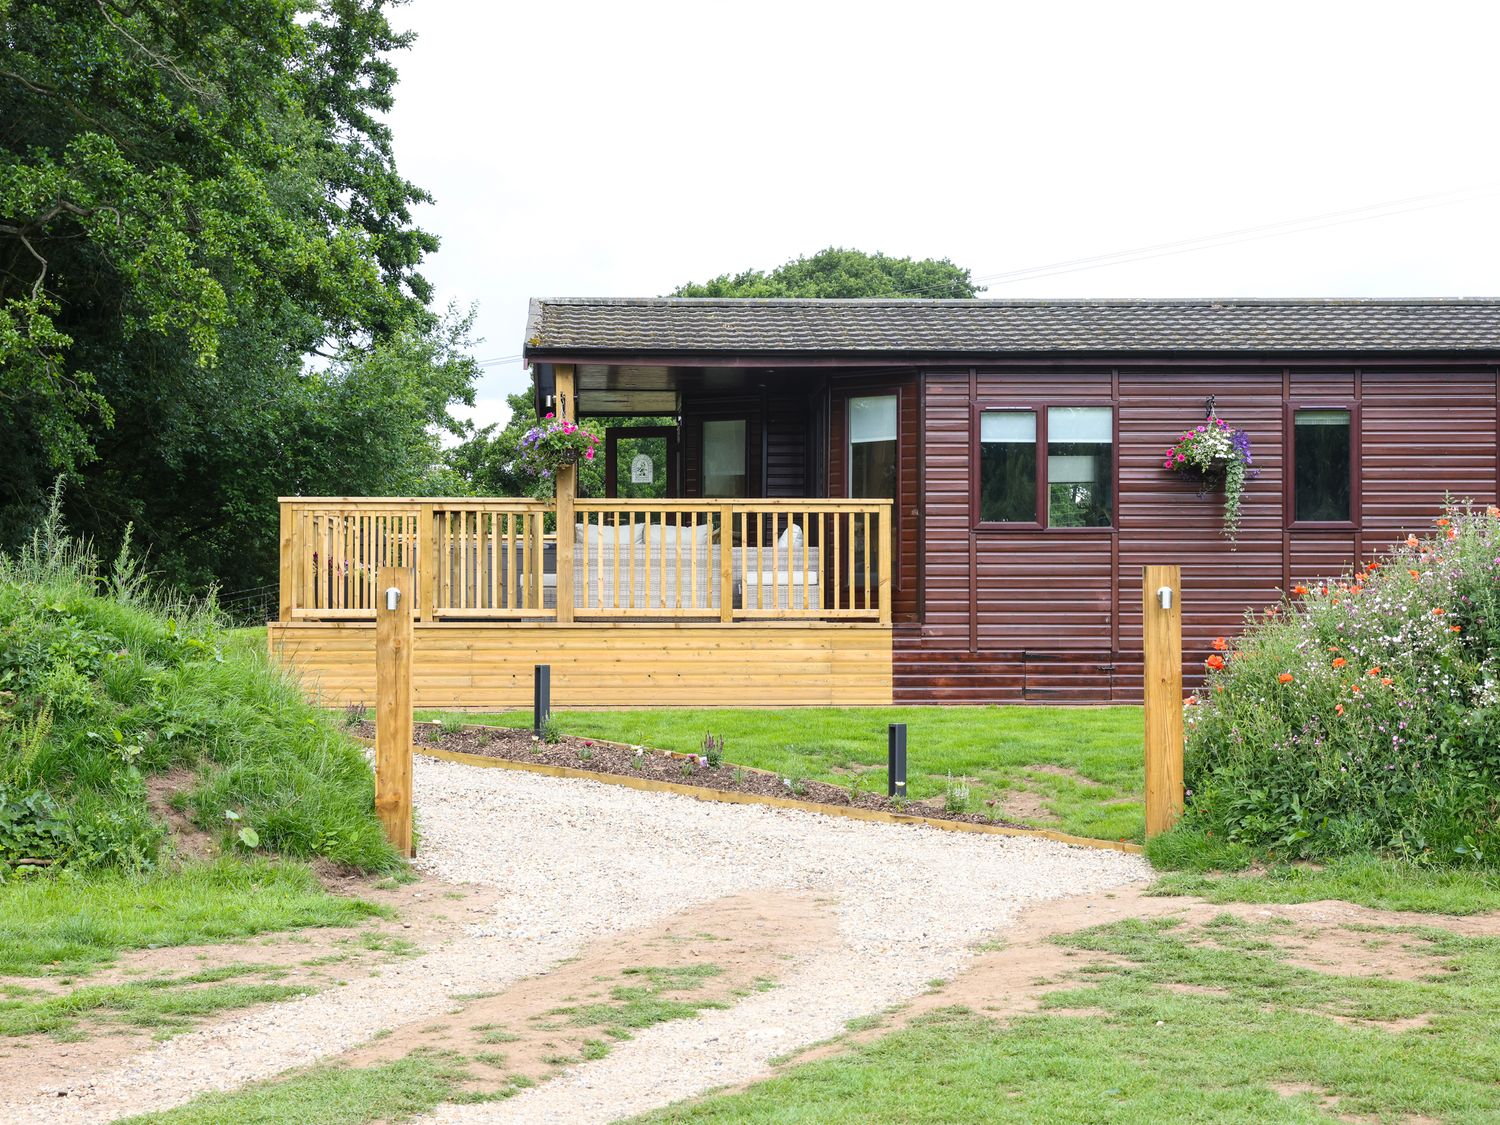 Bedale View Lodge, Wykeham near East Ayton, North Yorkshire. Near a National Park. Off-road parking.